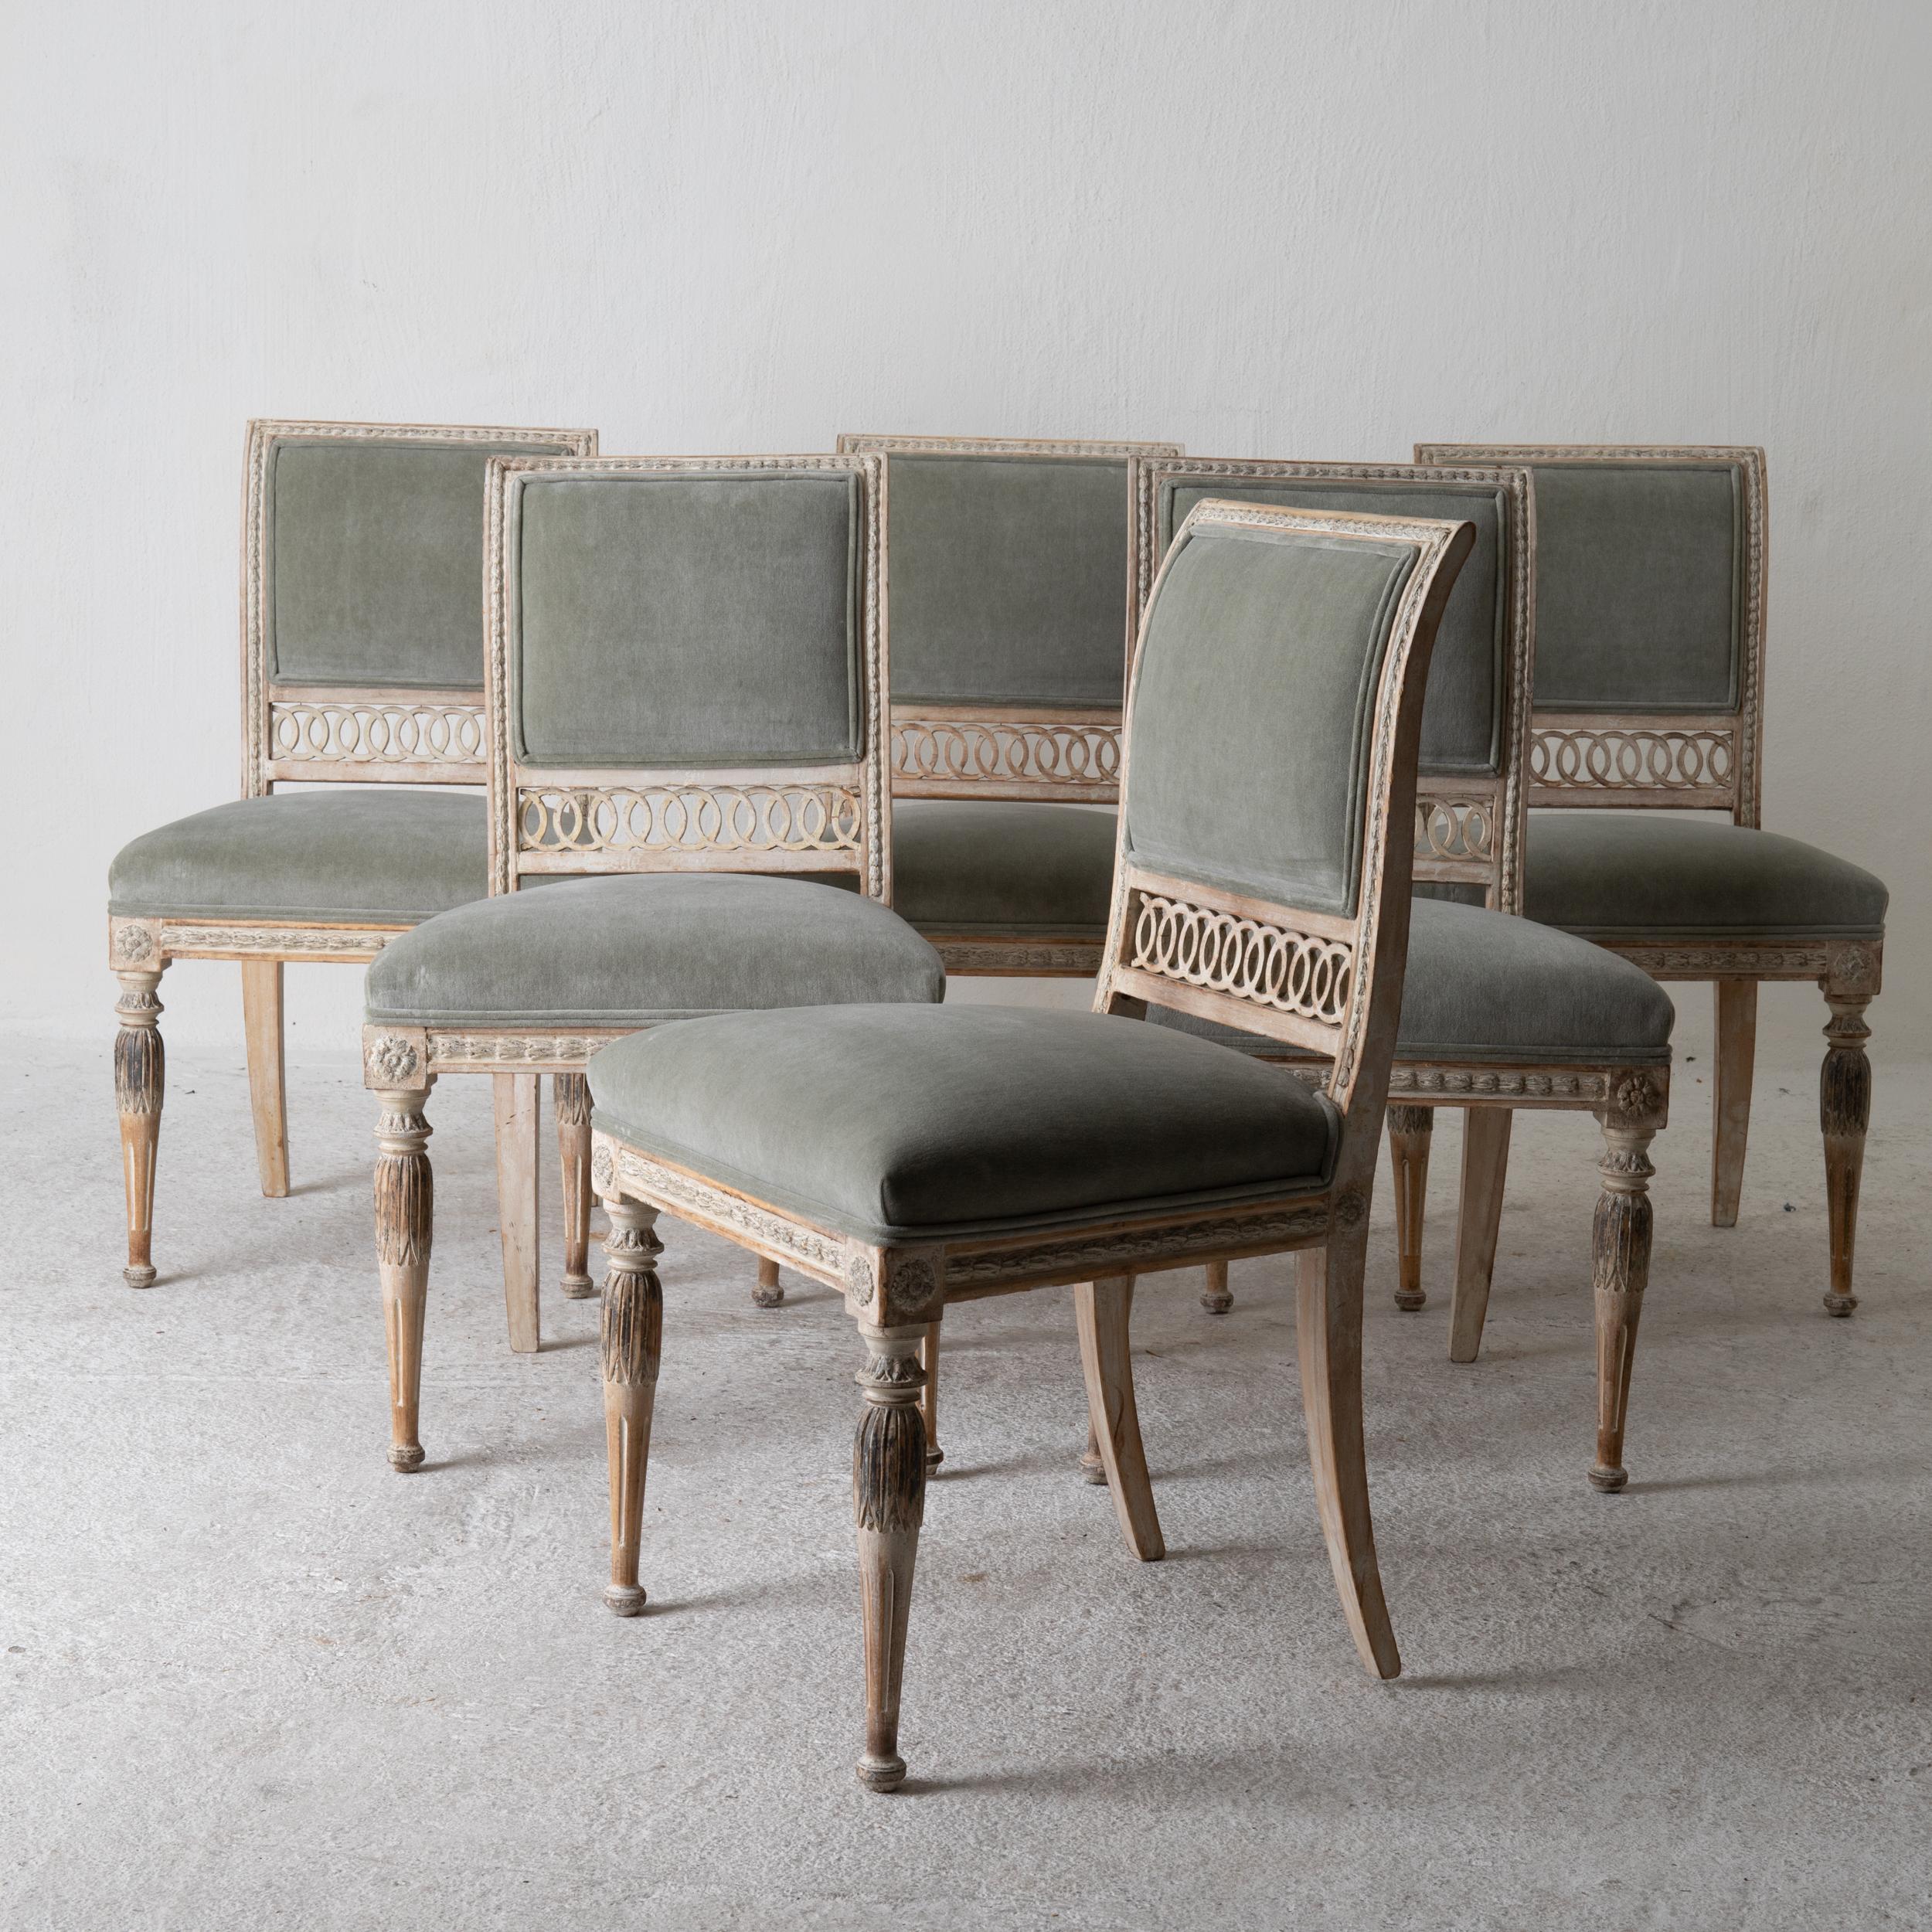 A set of dining chairs made during the Gustavian period 1790-1810 in Sweden. Beautifully carved frame and stripped to its original finish. Rounded and channeled legs. Upholstered back and seat in a light green cotton velvet. 

 